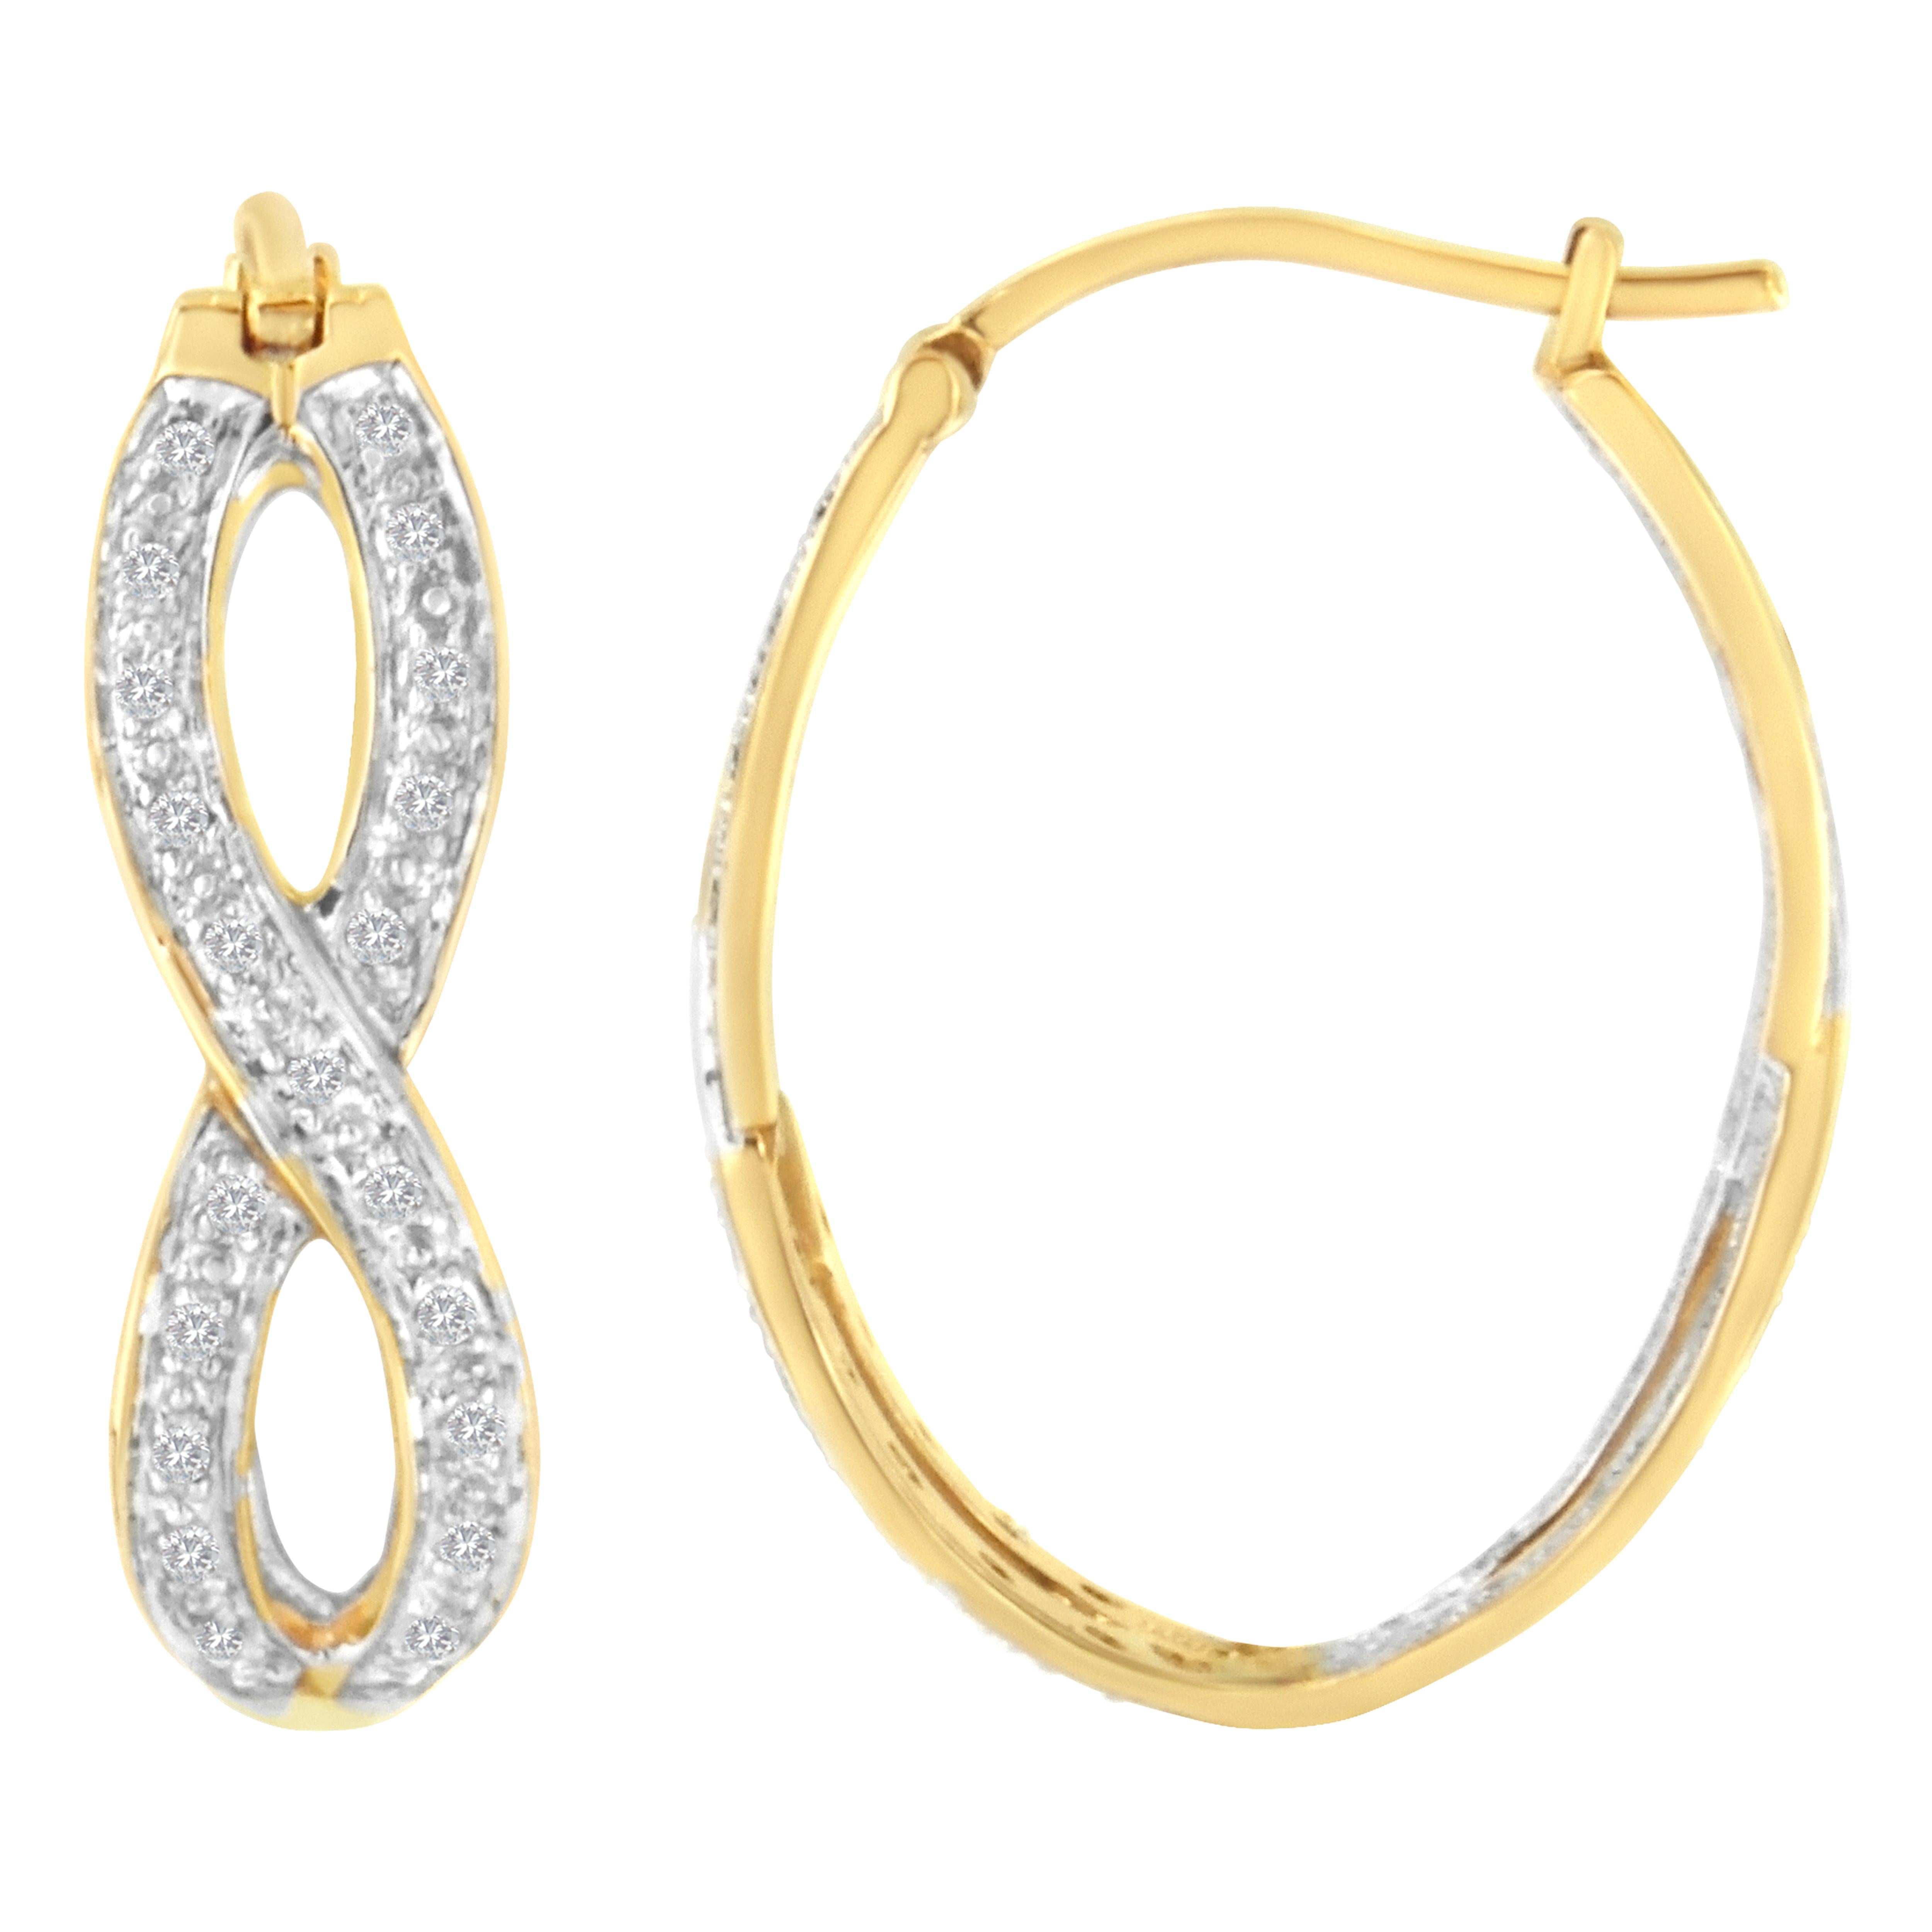 These beautiful 10k yellow and white gold hoop earrings showcase a 1/4 ct of natural diamonds. The earrings are designed in the shape of two infinity motifs and is created with an inner layer of white gold and an outer layer of yellow gold. The